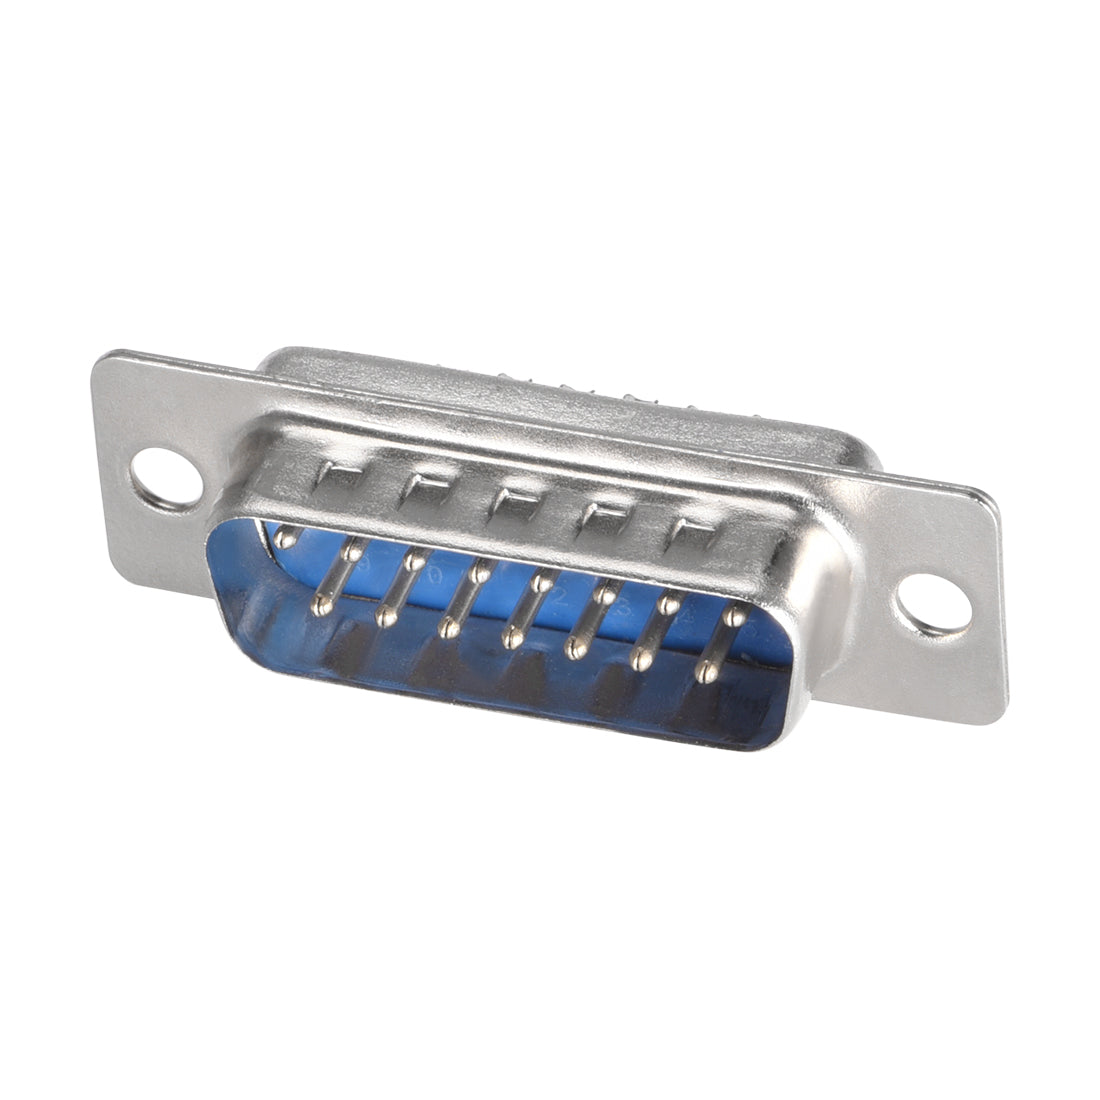 uxcell Uxcell D-sub Connector Male Plug 15-pin 2-row Port Terminal Breakout Solder Type for Mechanical Equipment CNC Computers Blue 1pc